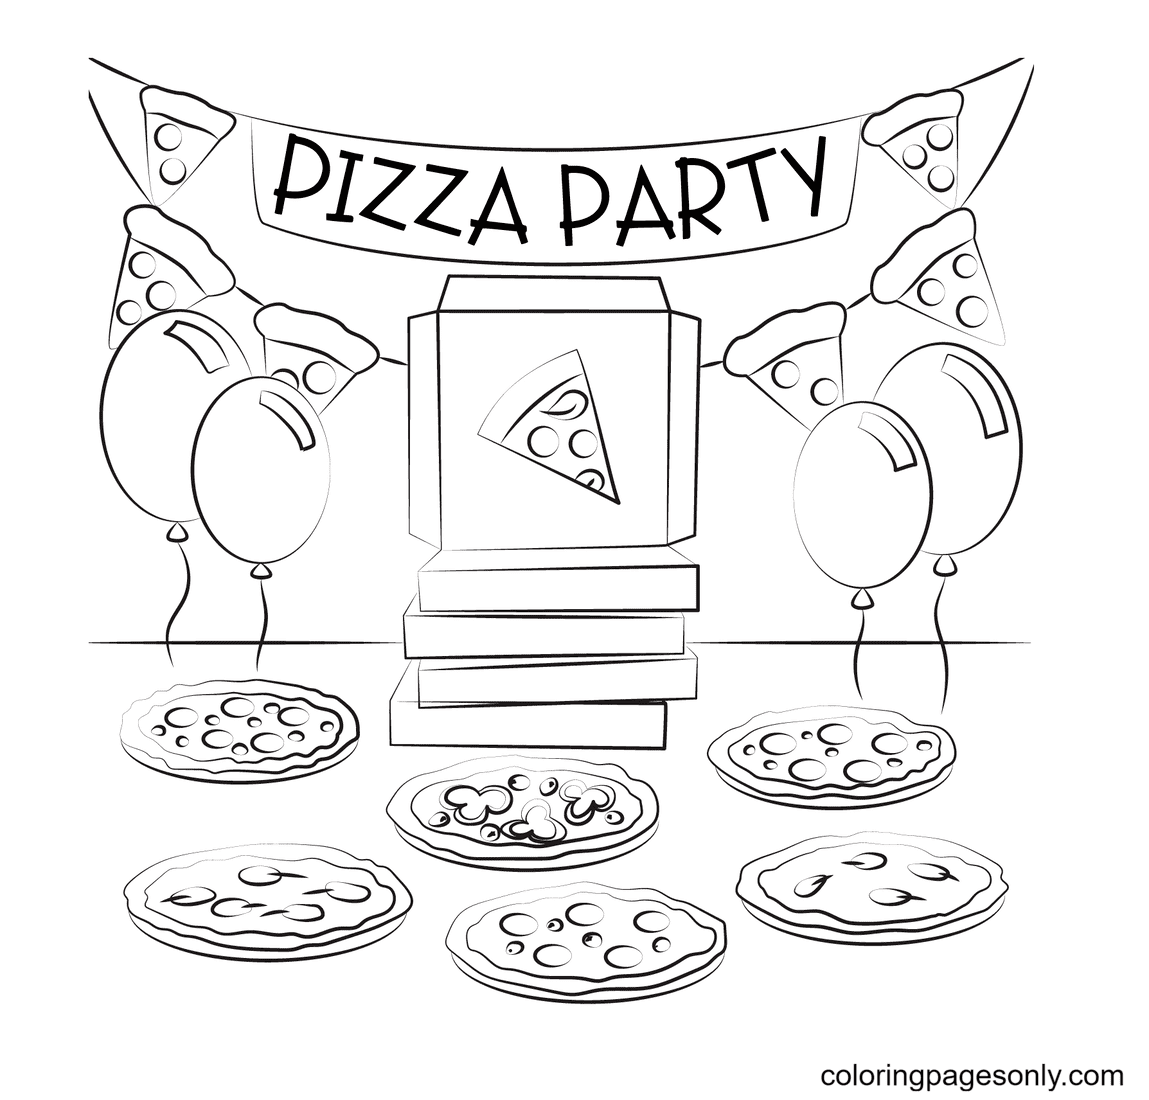 Pizza Party Coloring Pages